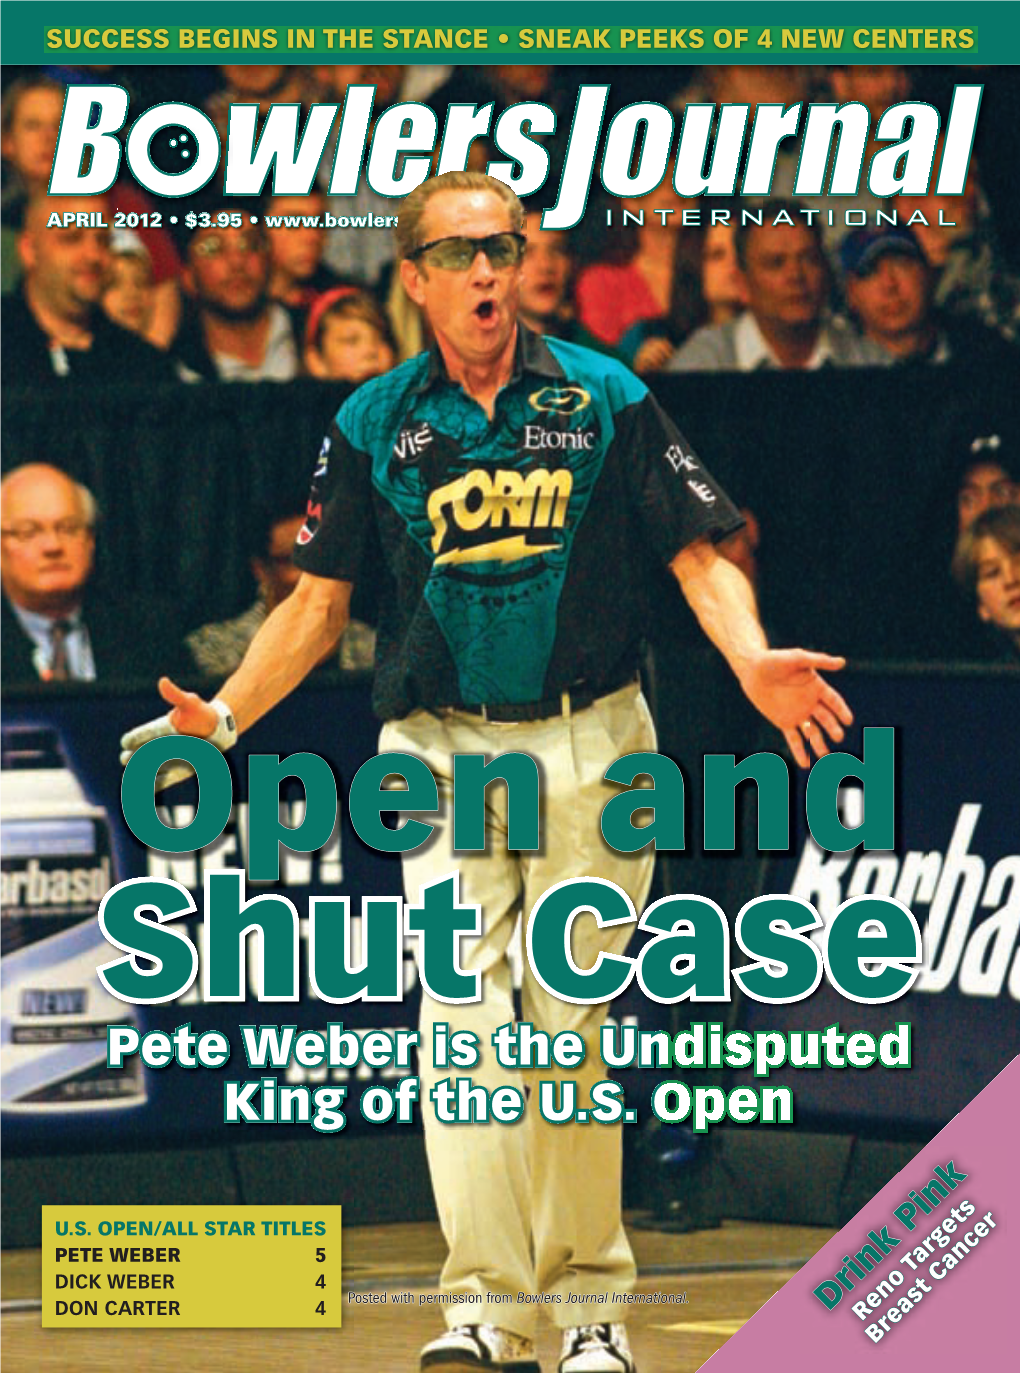 Pete Weber Is the Undisputed King of the U.S. Open